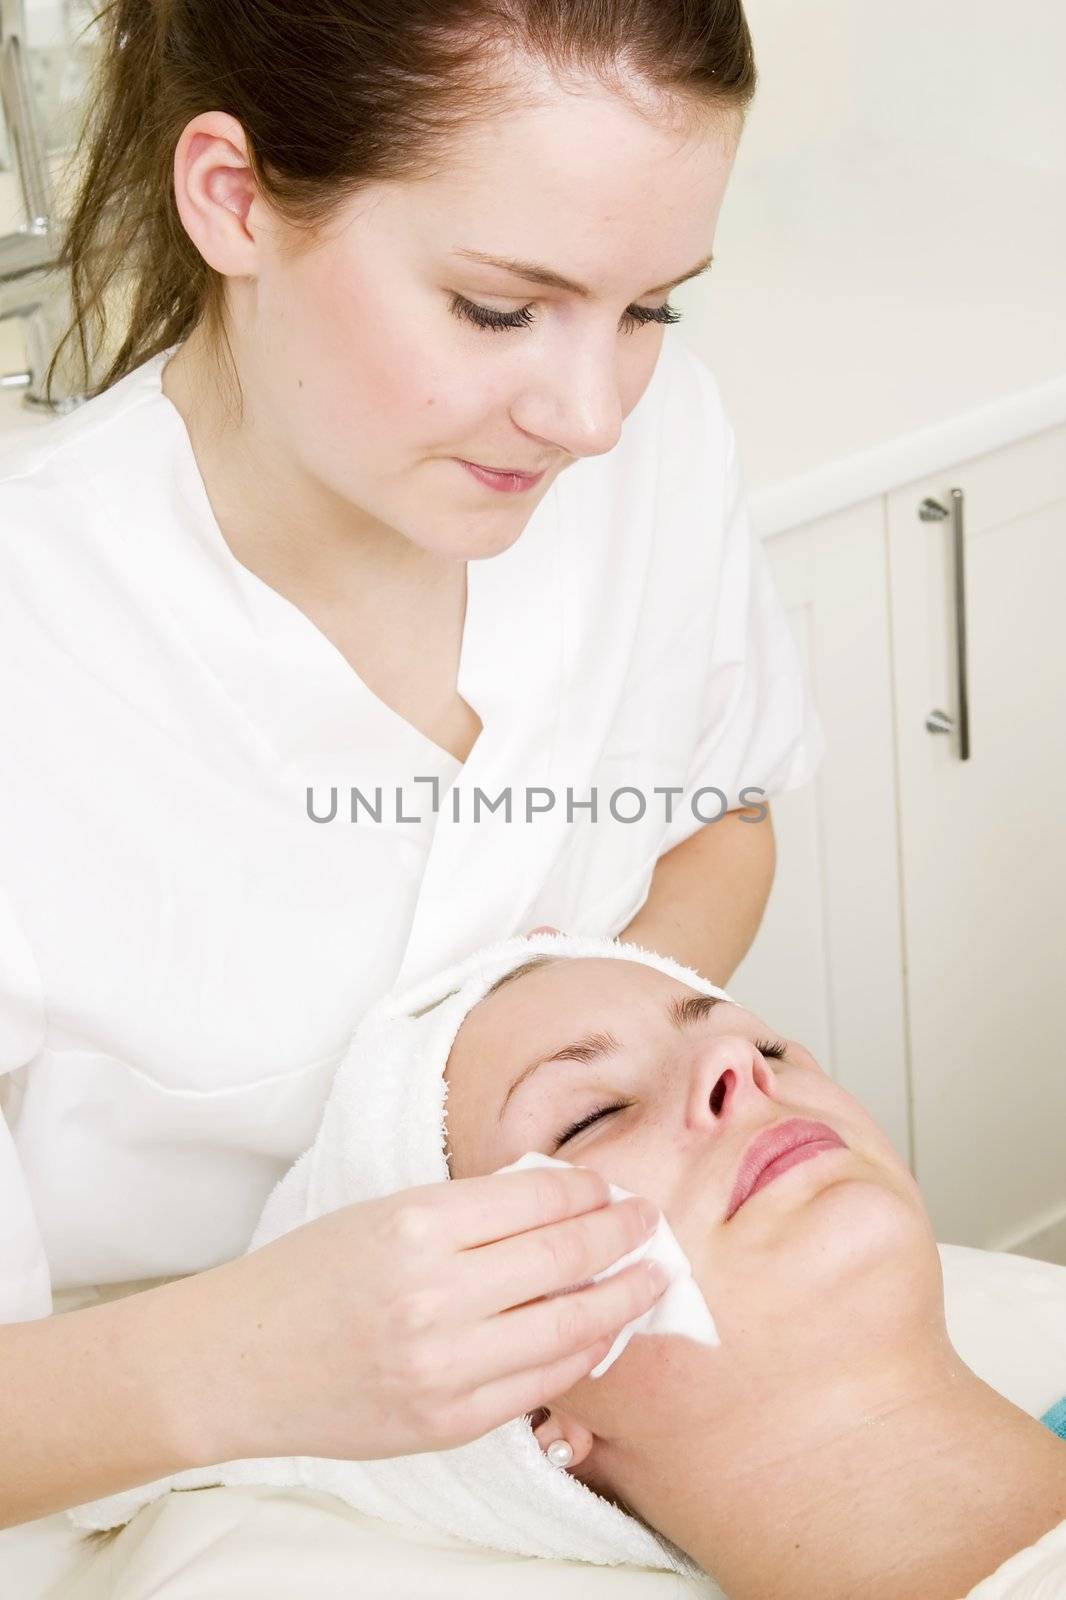 Lotion being wiped off during a facial at a beauty spa.